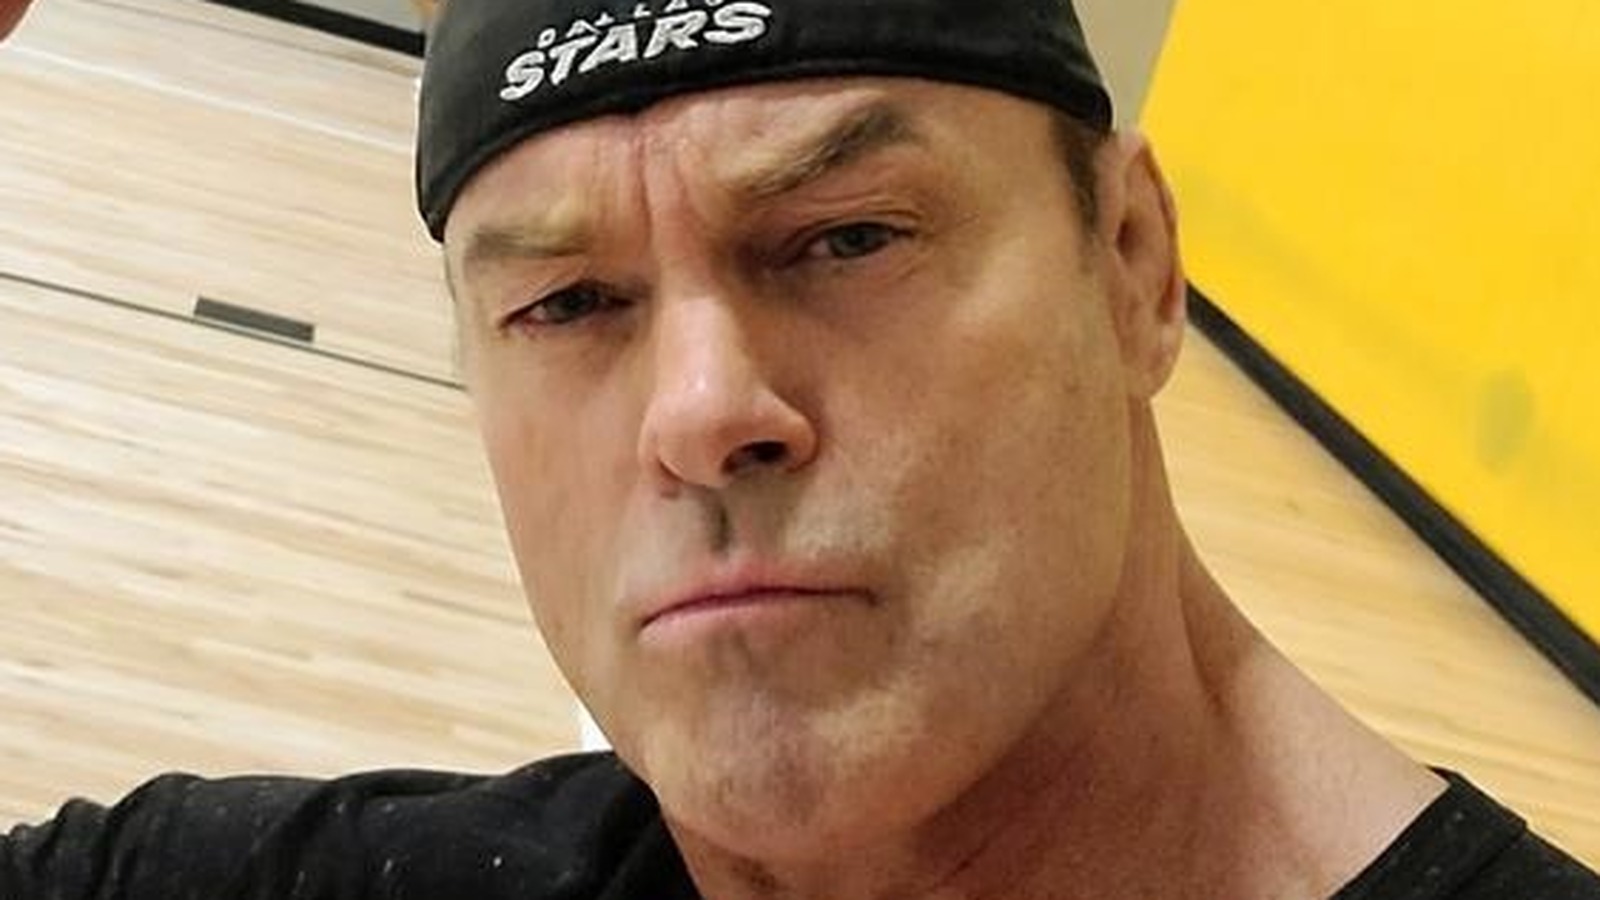 Shawn Stasiak On His Dad's 24-Second WWE Hall Of Fame Induction: 'I Was Heartbroken'